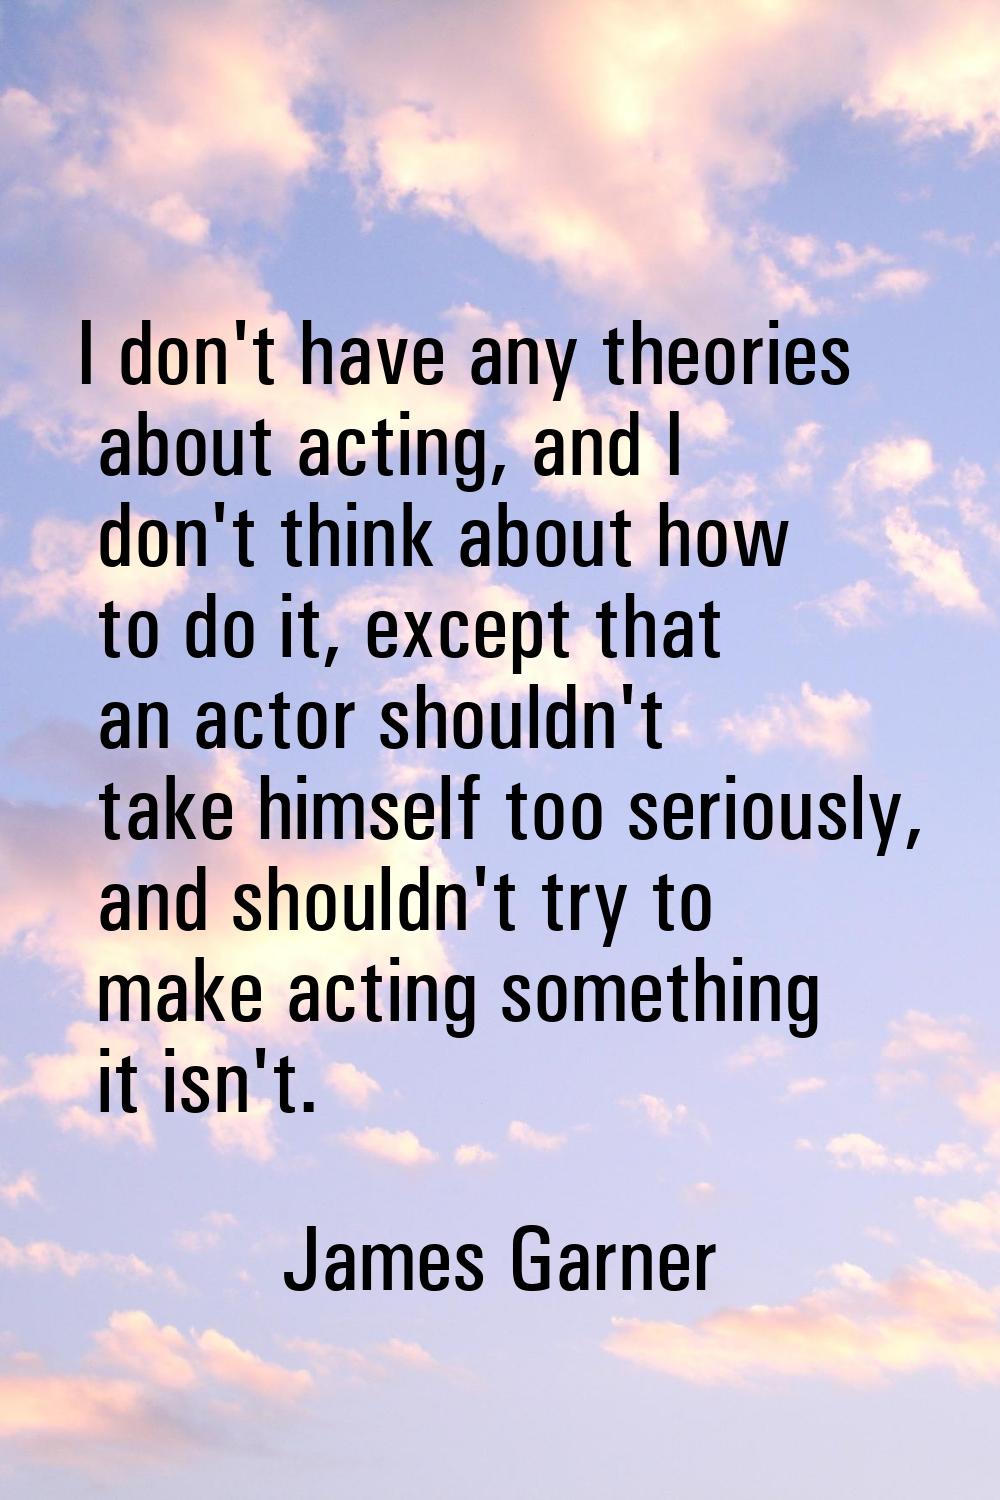 I don't have any theories about acting, and I don't think about how to do it, except that an actor 